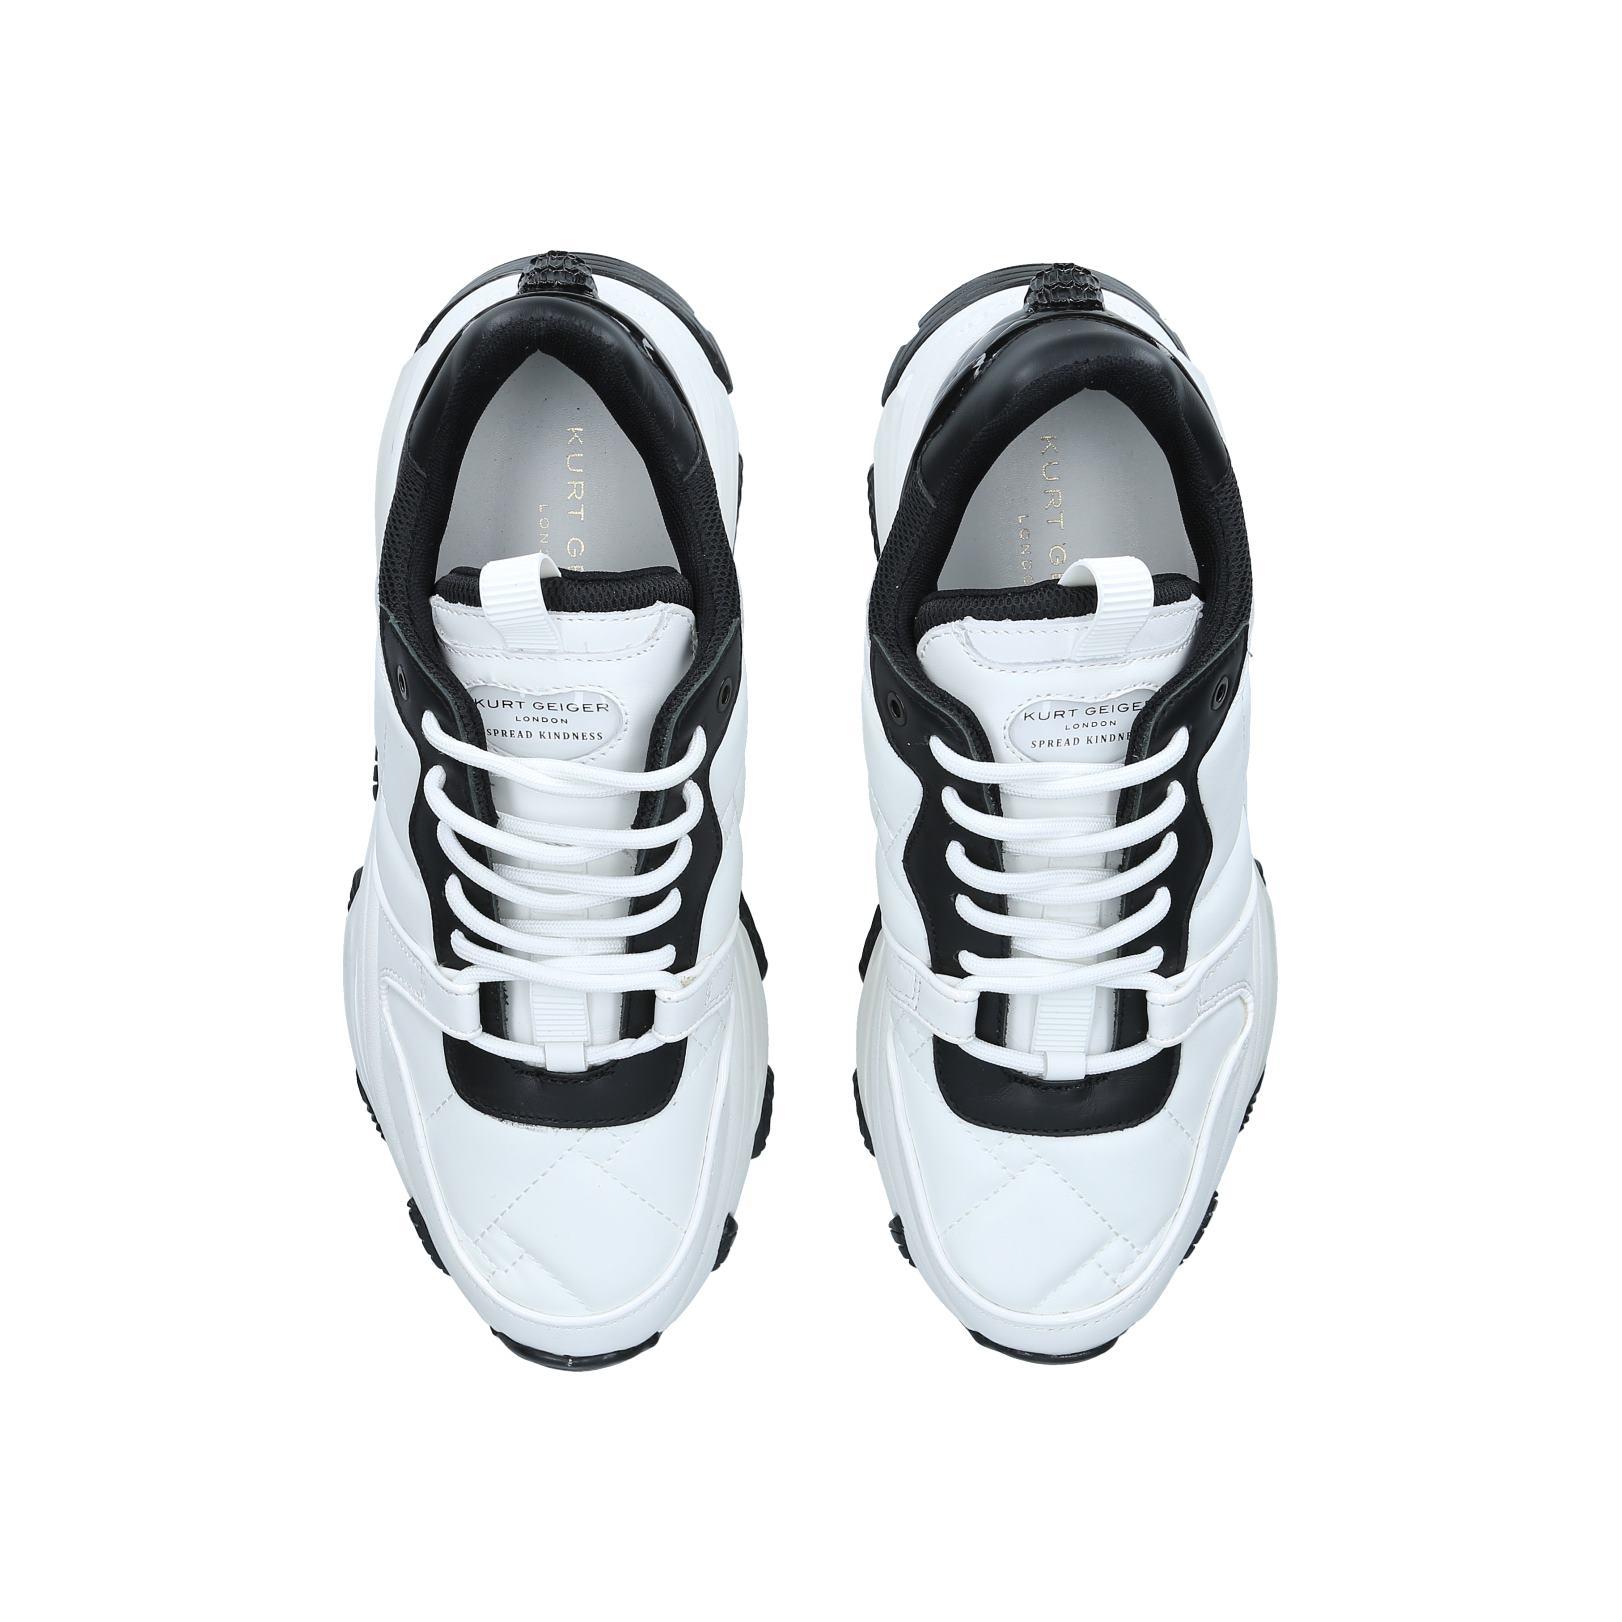 LETTIE EAGLE MENS White Black Leather Chunky Sneakers by KURT GEIGER LONDON